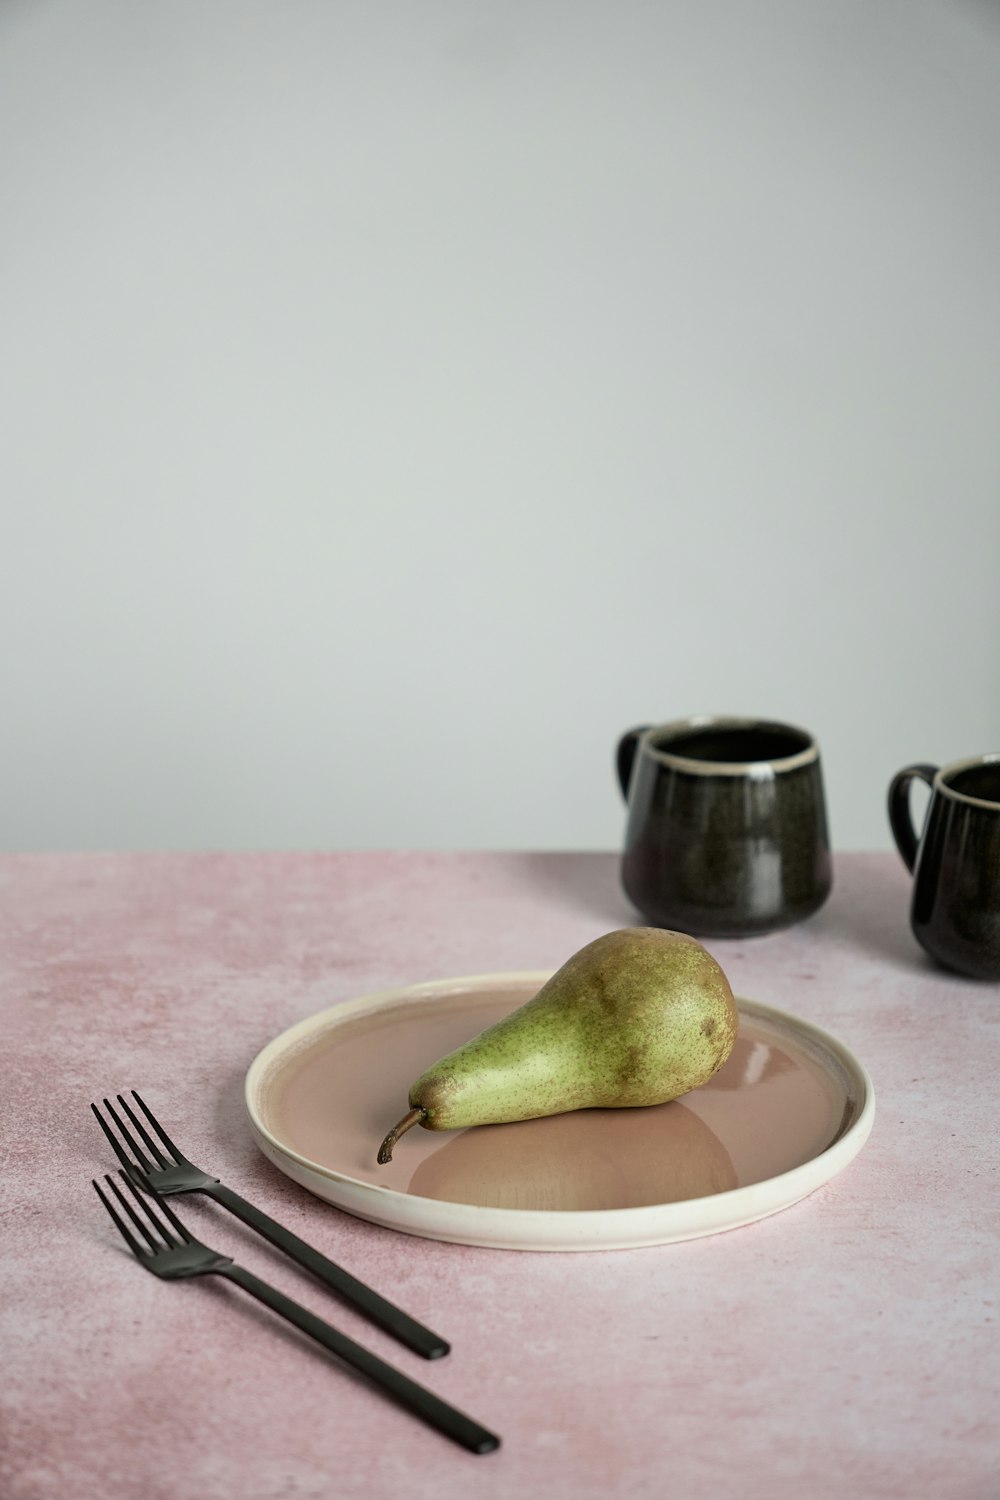 a plate with a pear and a fork on it